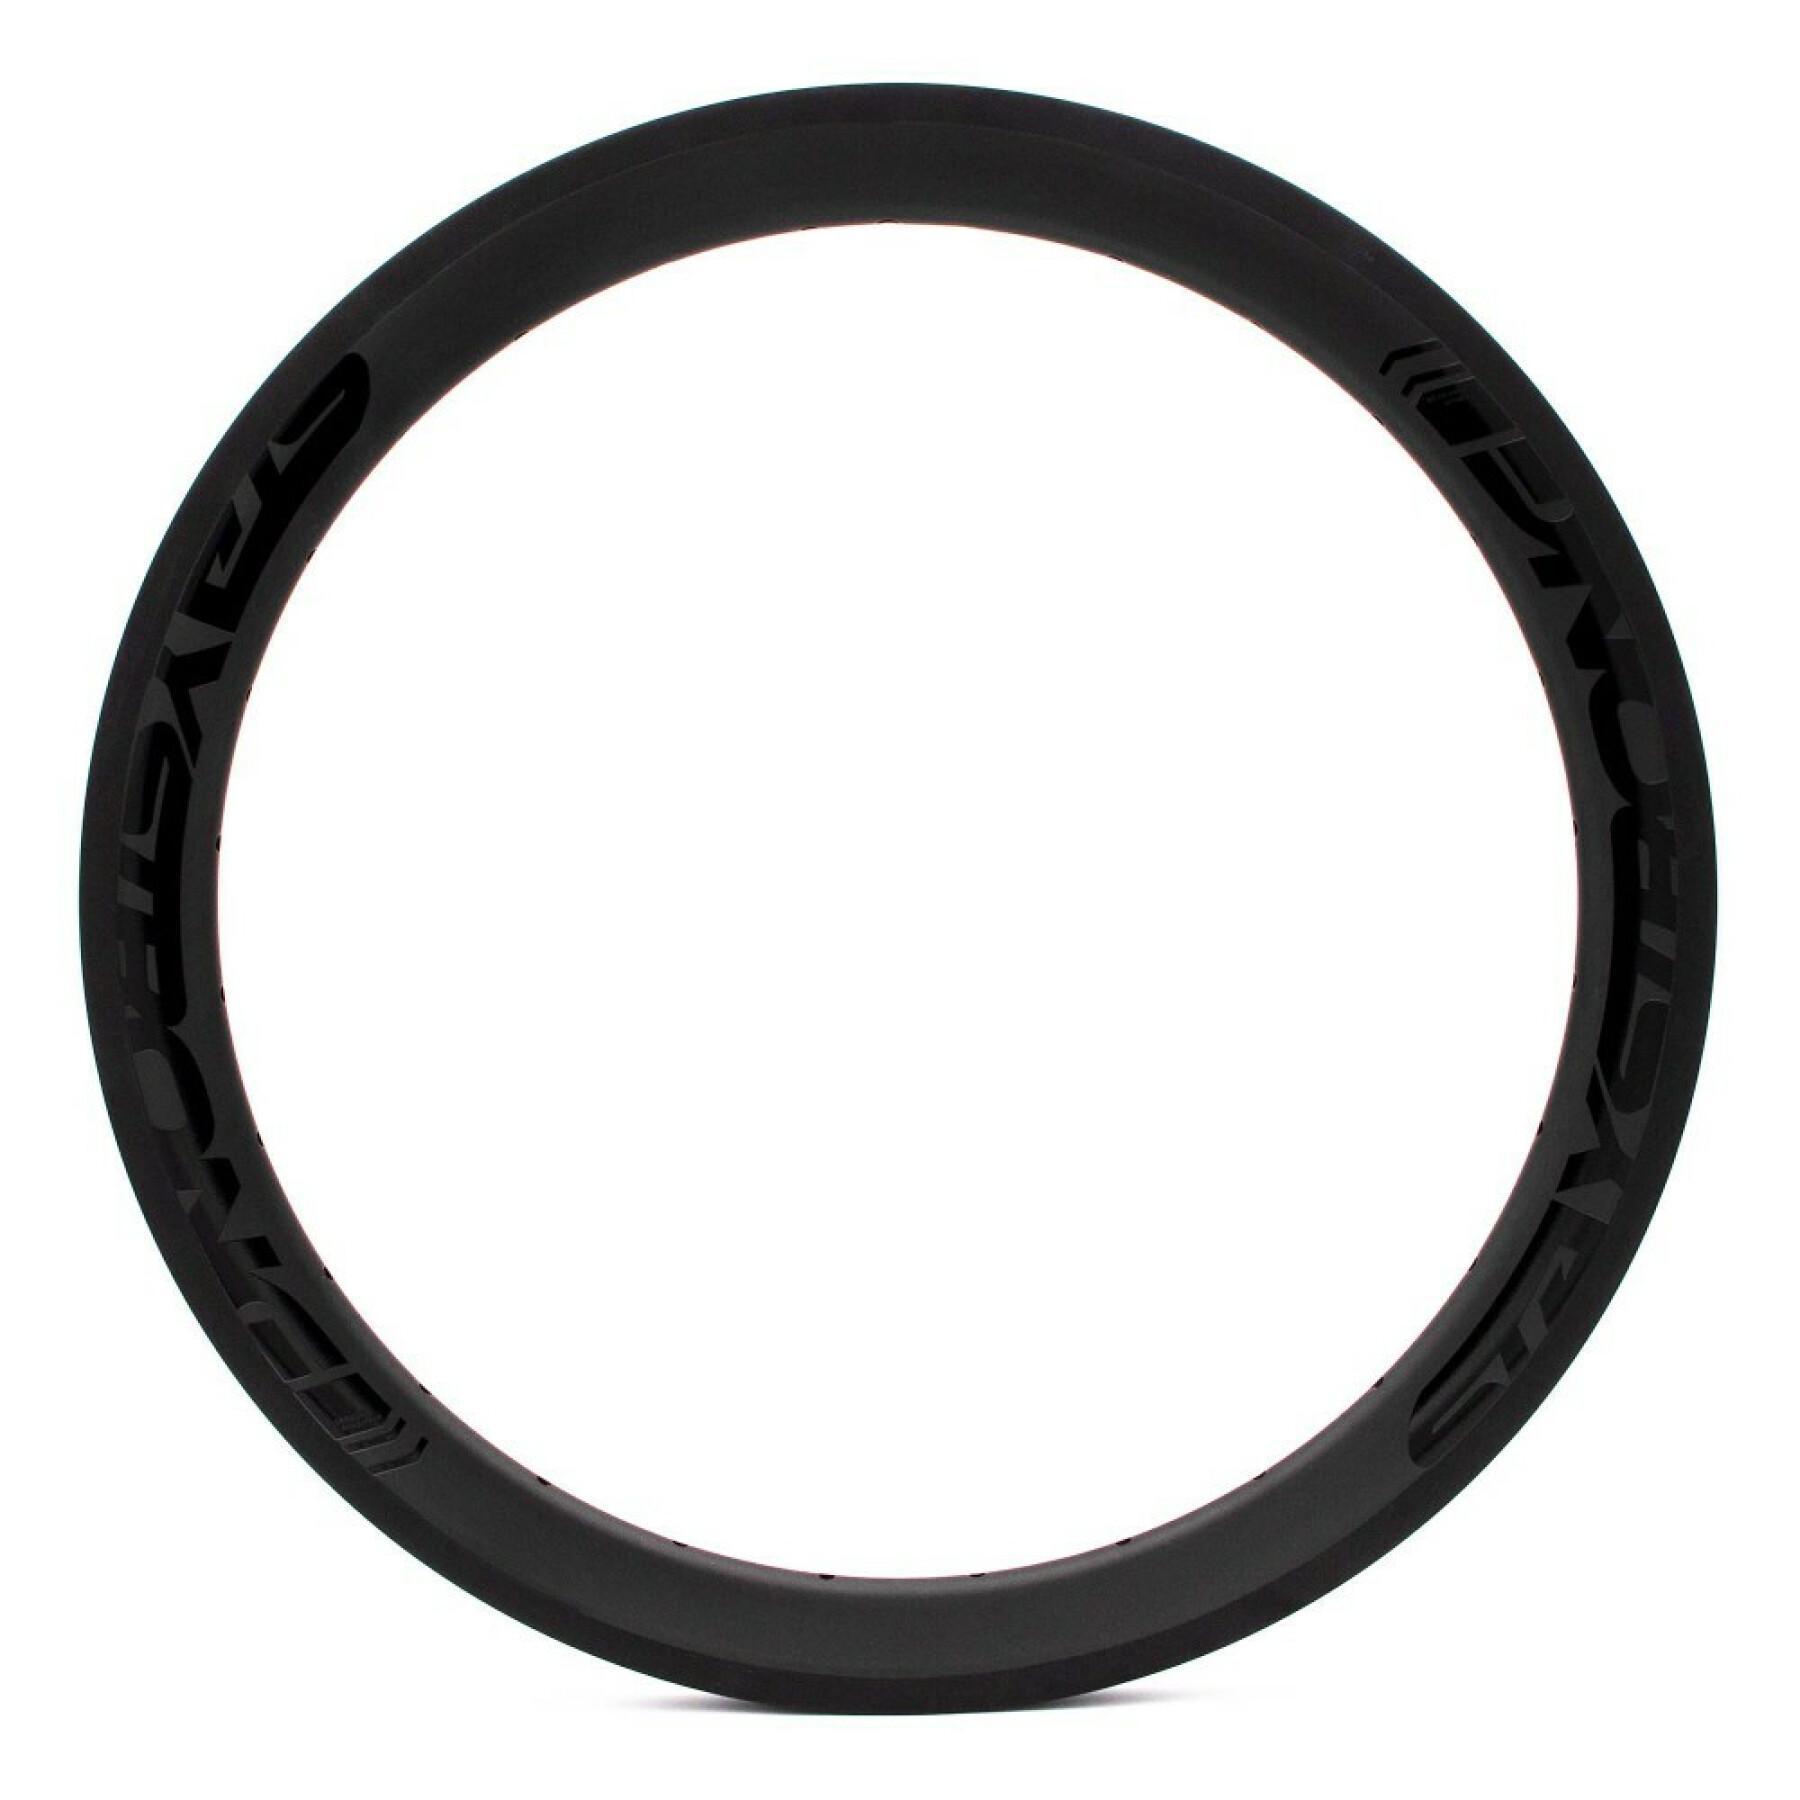 Rim Stay Strong Carbon Expert 28H